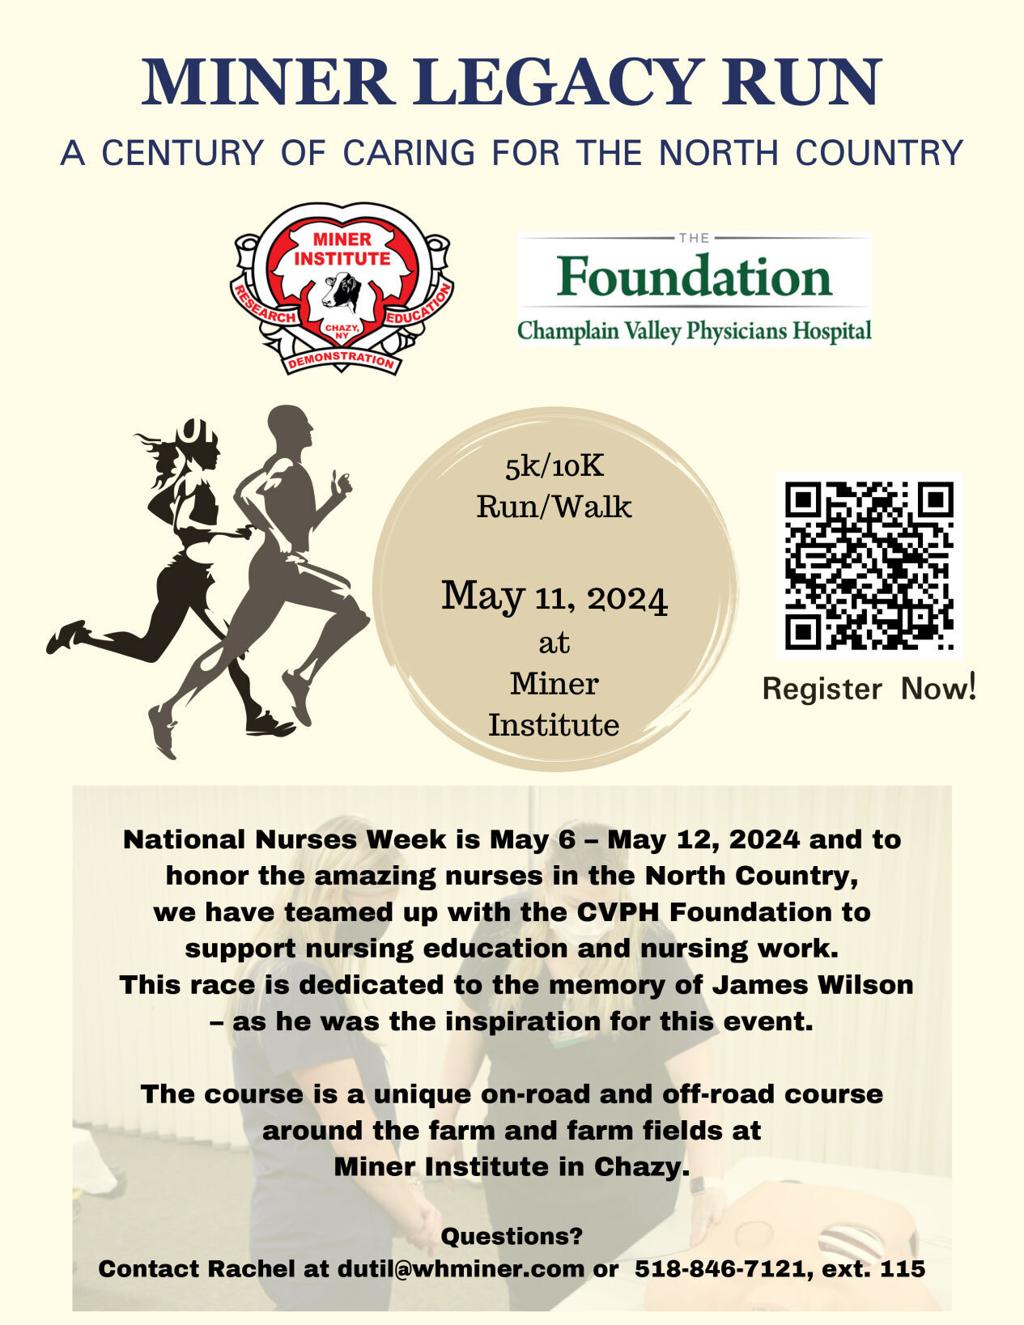 Miner Legacy Run set in Chazy on May 11